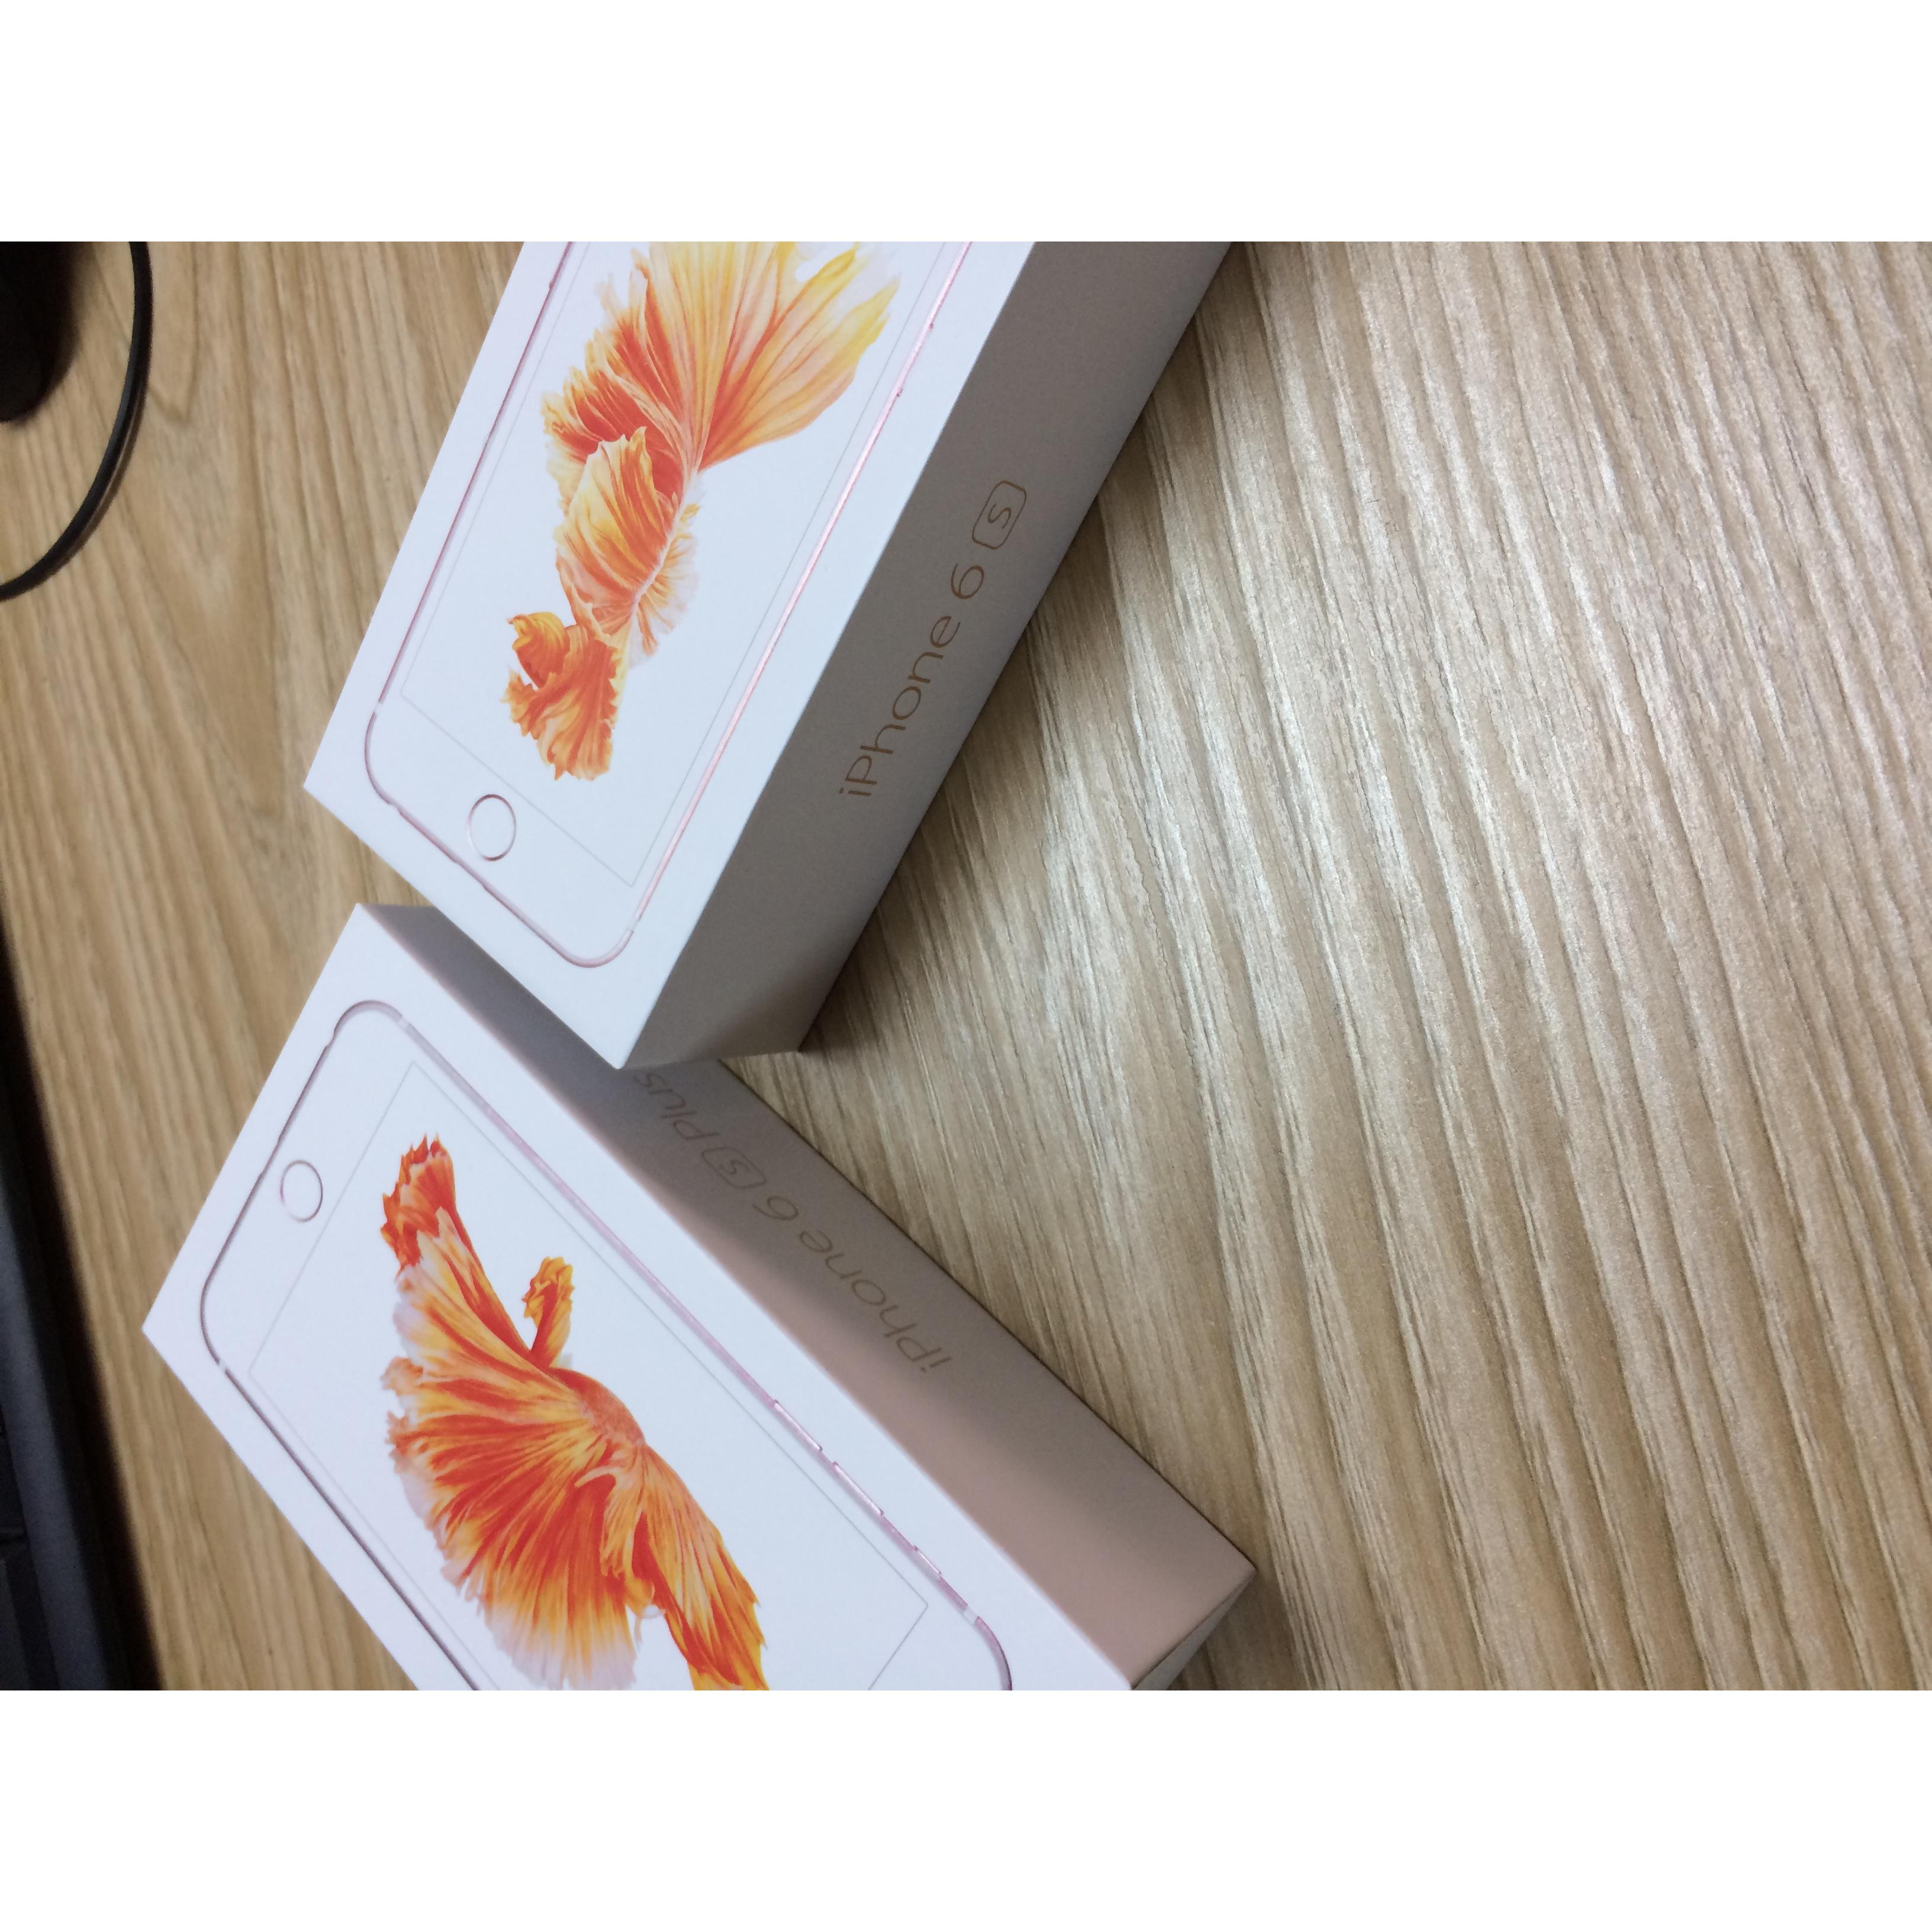 Apple Iphone 6S Boxes Wholesale Suppliers